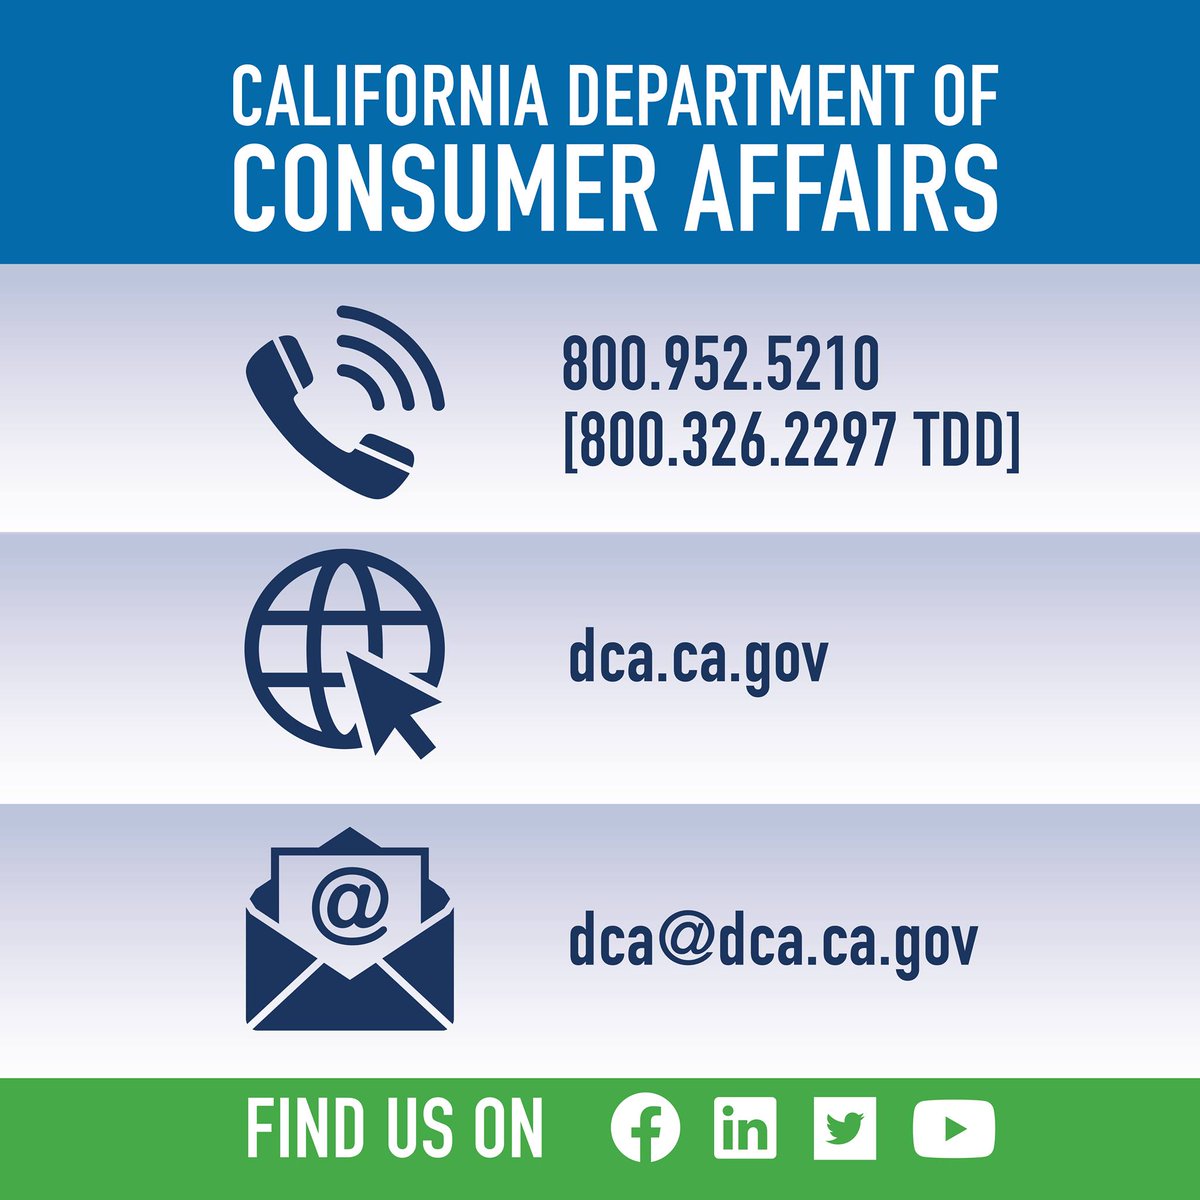 Did you know Consumer Information Center representatives can answer consumer, licensee, and applicant questions in over 200 different languages? Call 800-952-5210.